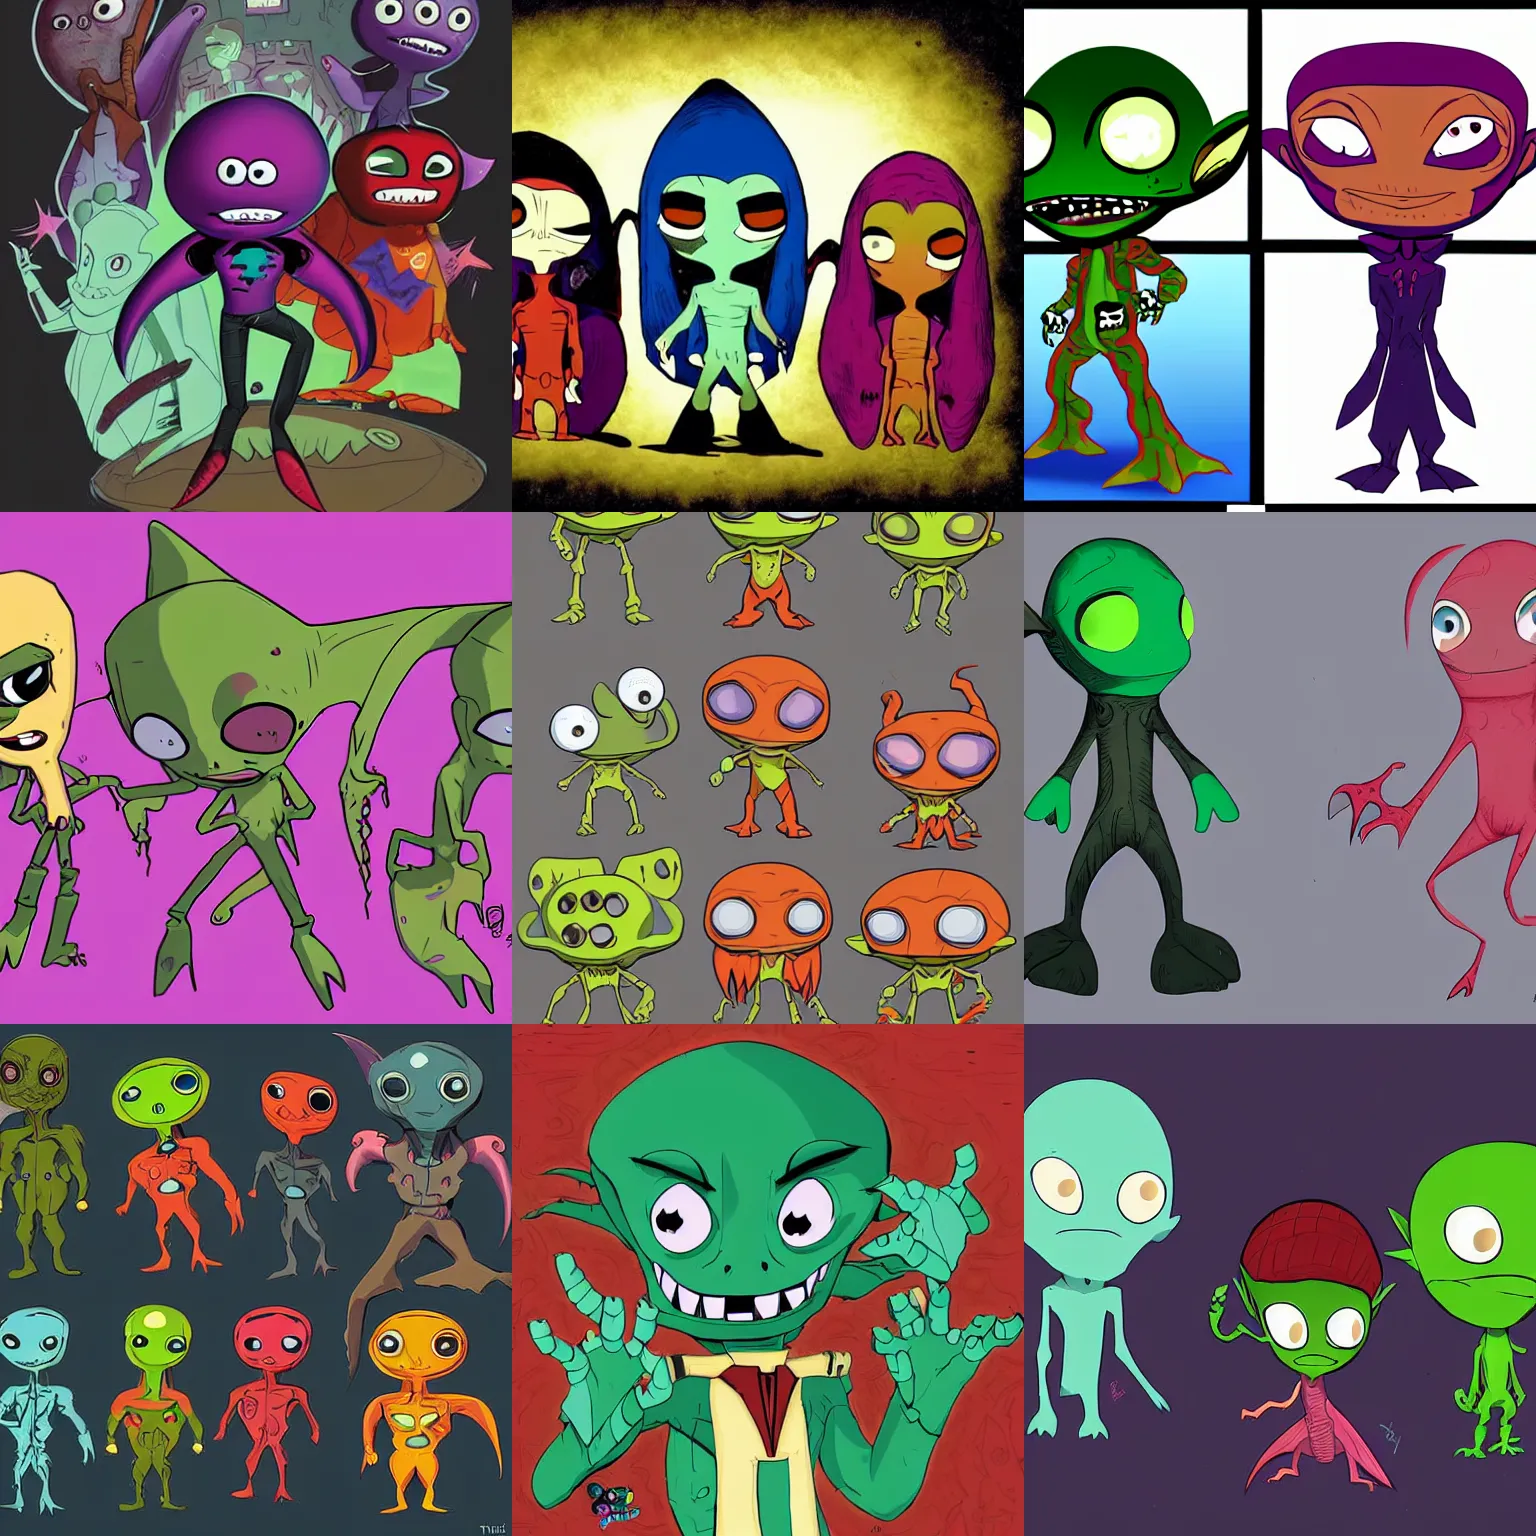 Prompt: friend shaped little vampire squid alien mutant race as playable character designs for the newest psychonauts video game made by double fine done by tim shafer with help from the artist for the band gorillaz and the artists from odd world inhabitant inc and Lauren faust from her work on dc superhero girls and lead artist Andy Suriano from rise of the teenage mutant ninja turtles on nickelodeon using the color character color choices from Nintendos Splatoon game franchise